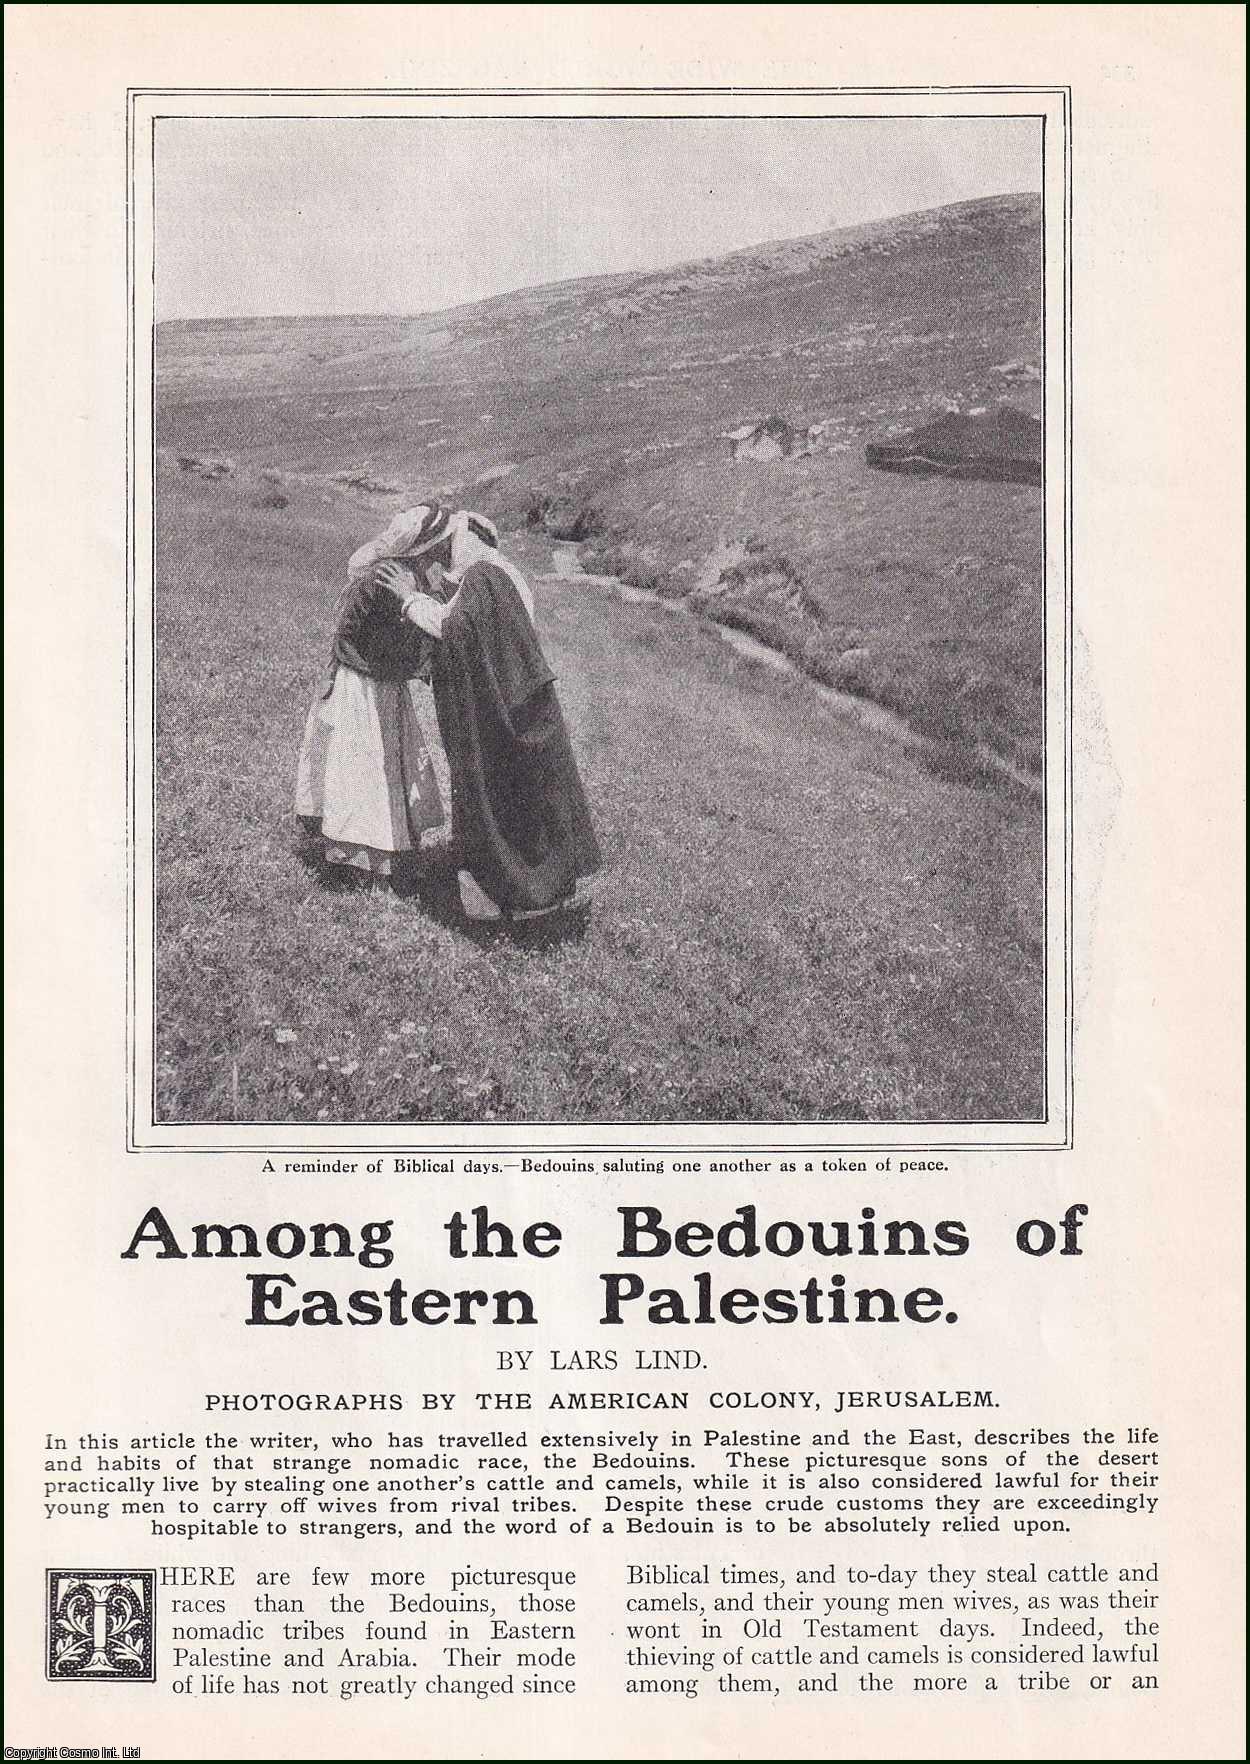 Lars Lind - Among the Bedouins of Eastern Palestine : the life & habits of the Nomadic race. An uncommon original article from the Wide World Magazine, 1912.